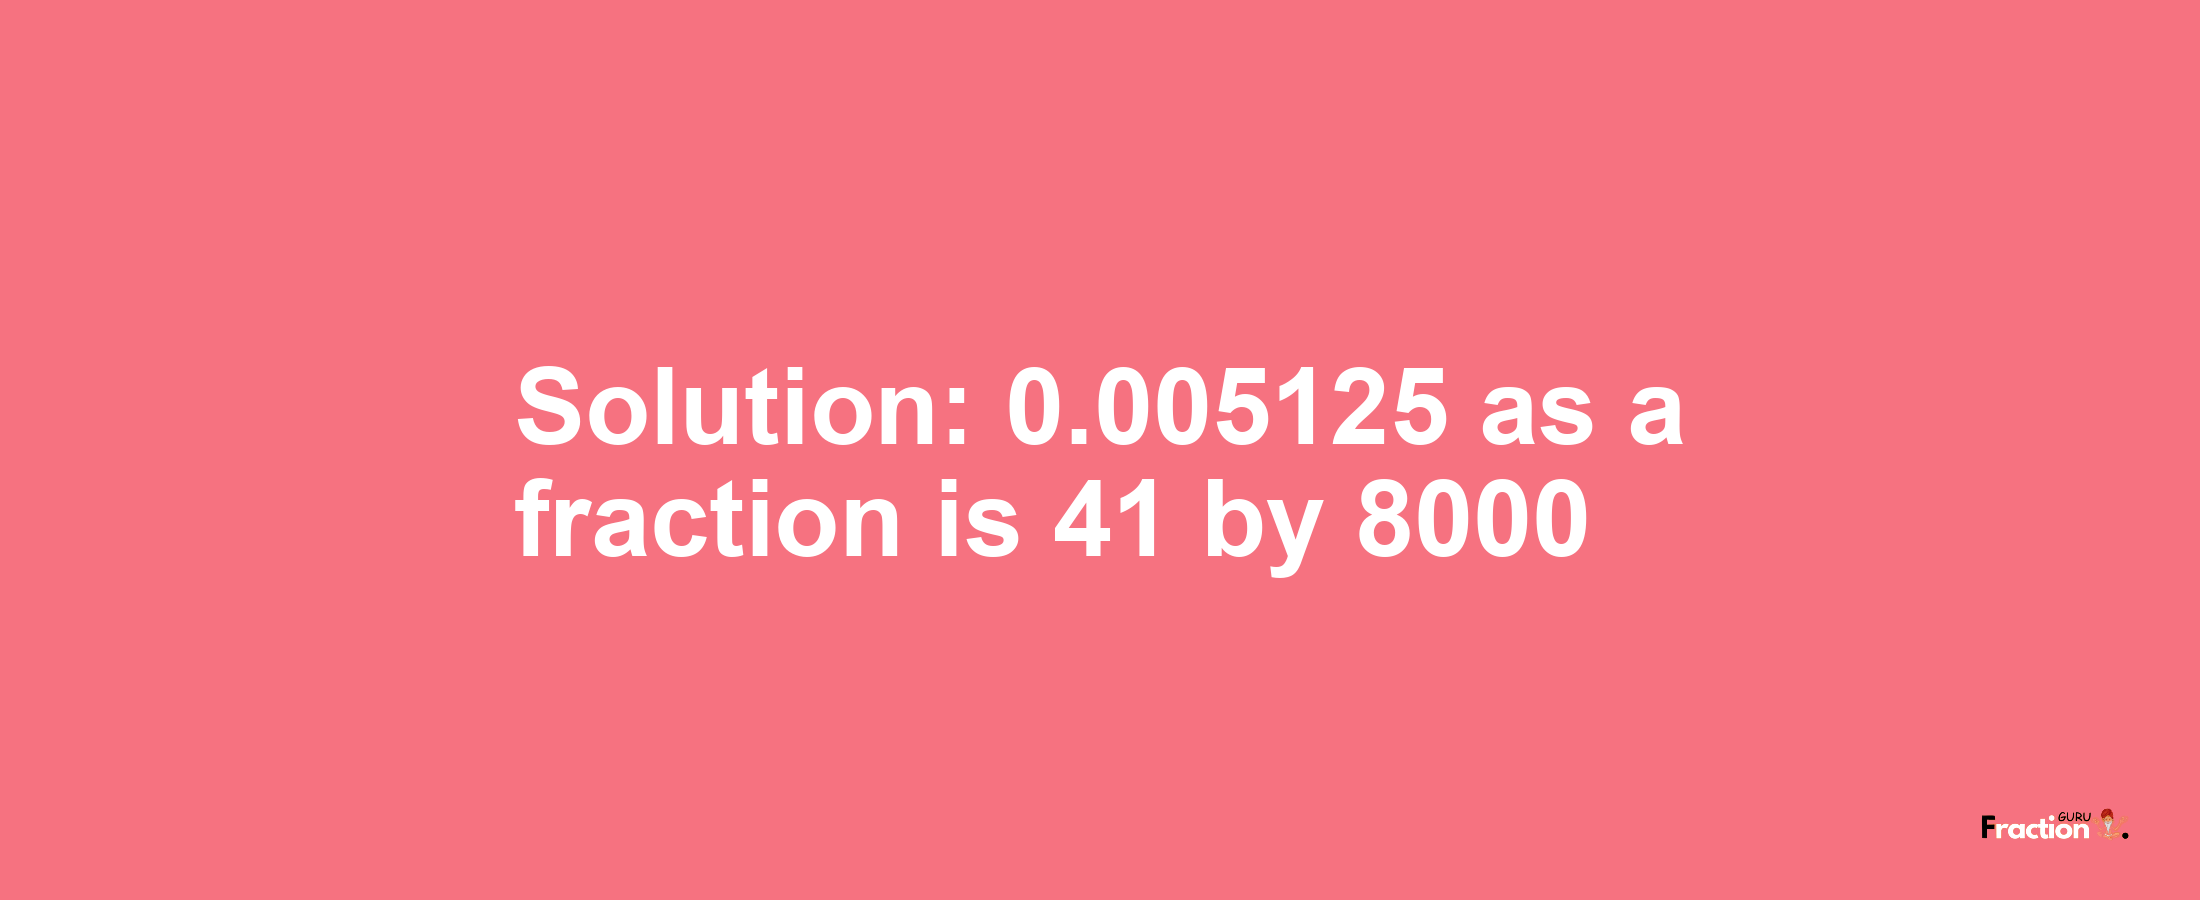 Solution:0.005125 as a fraction is 41/8000